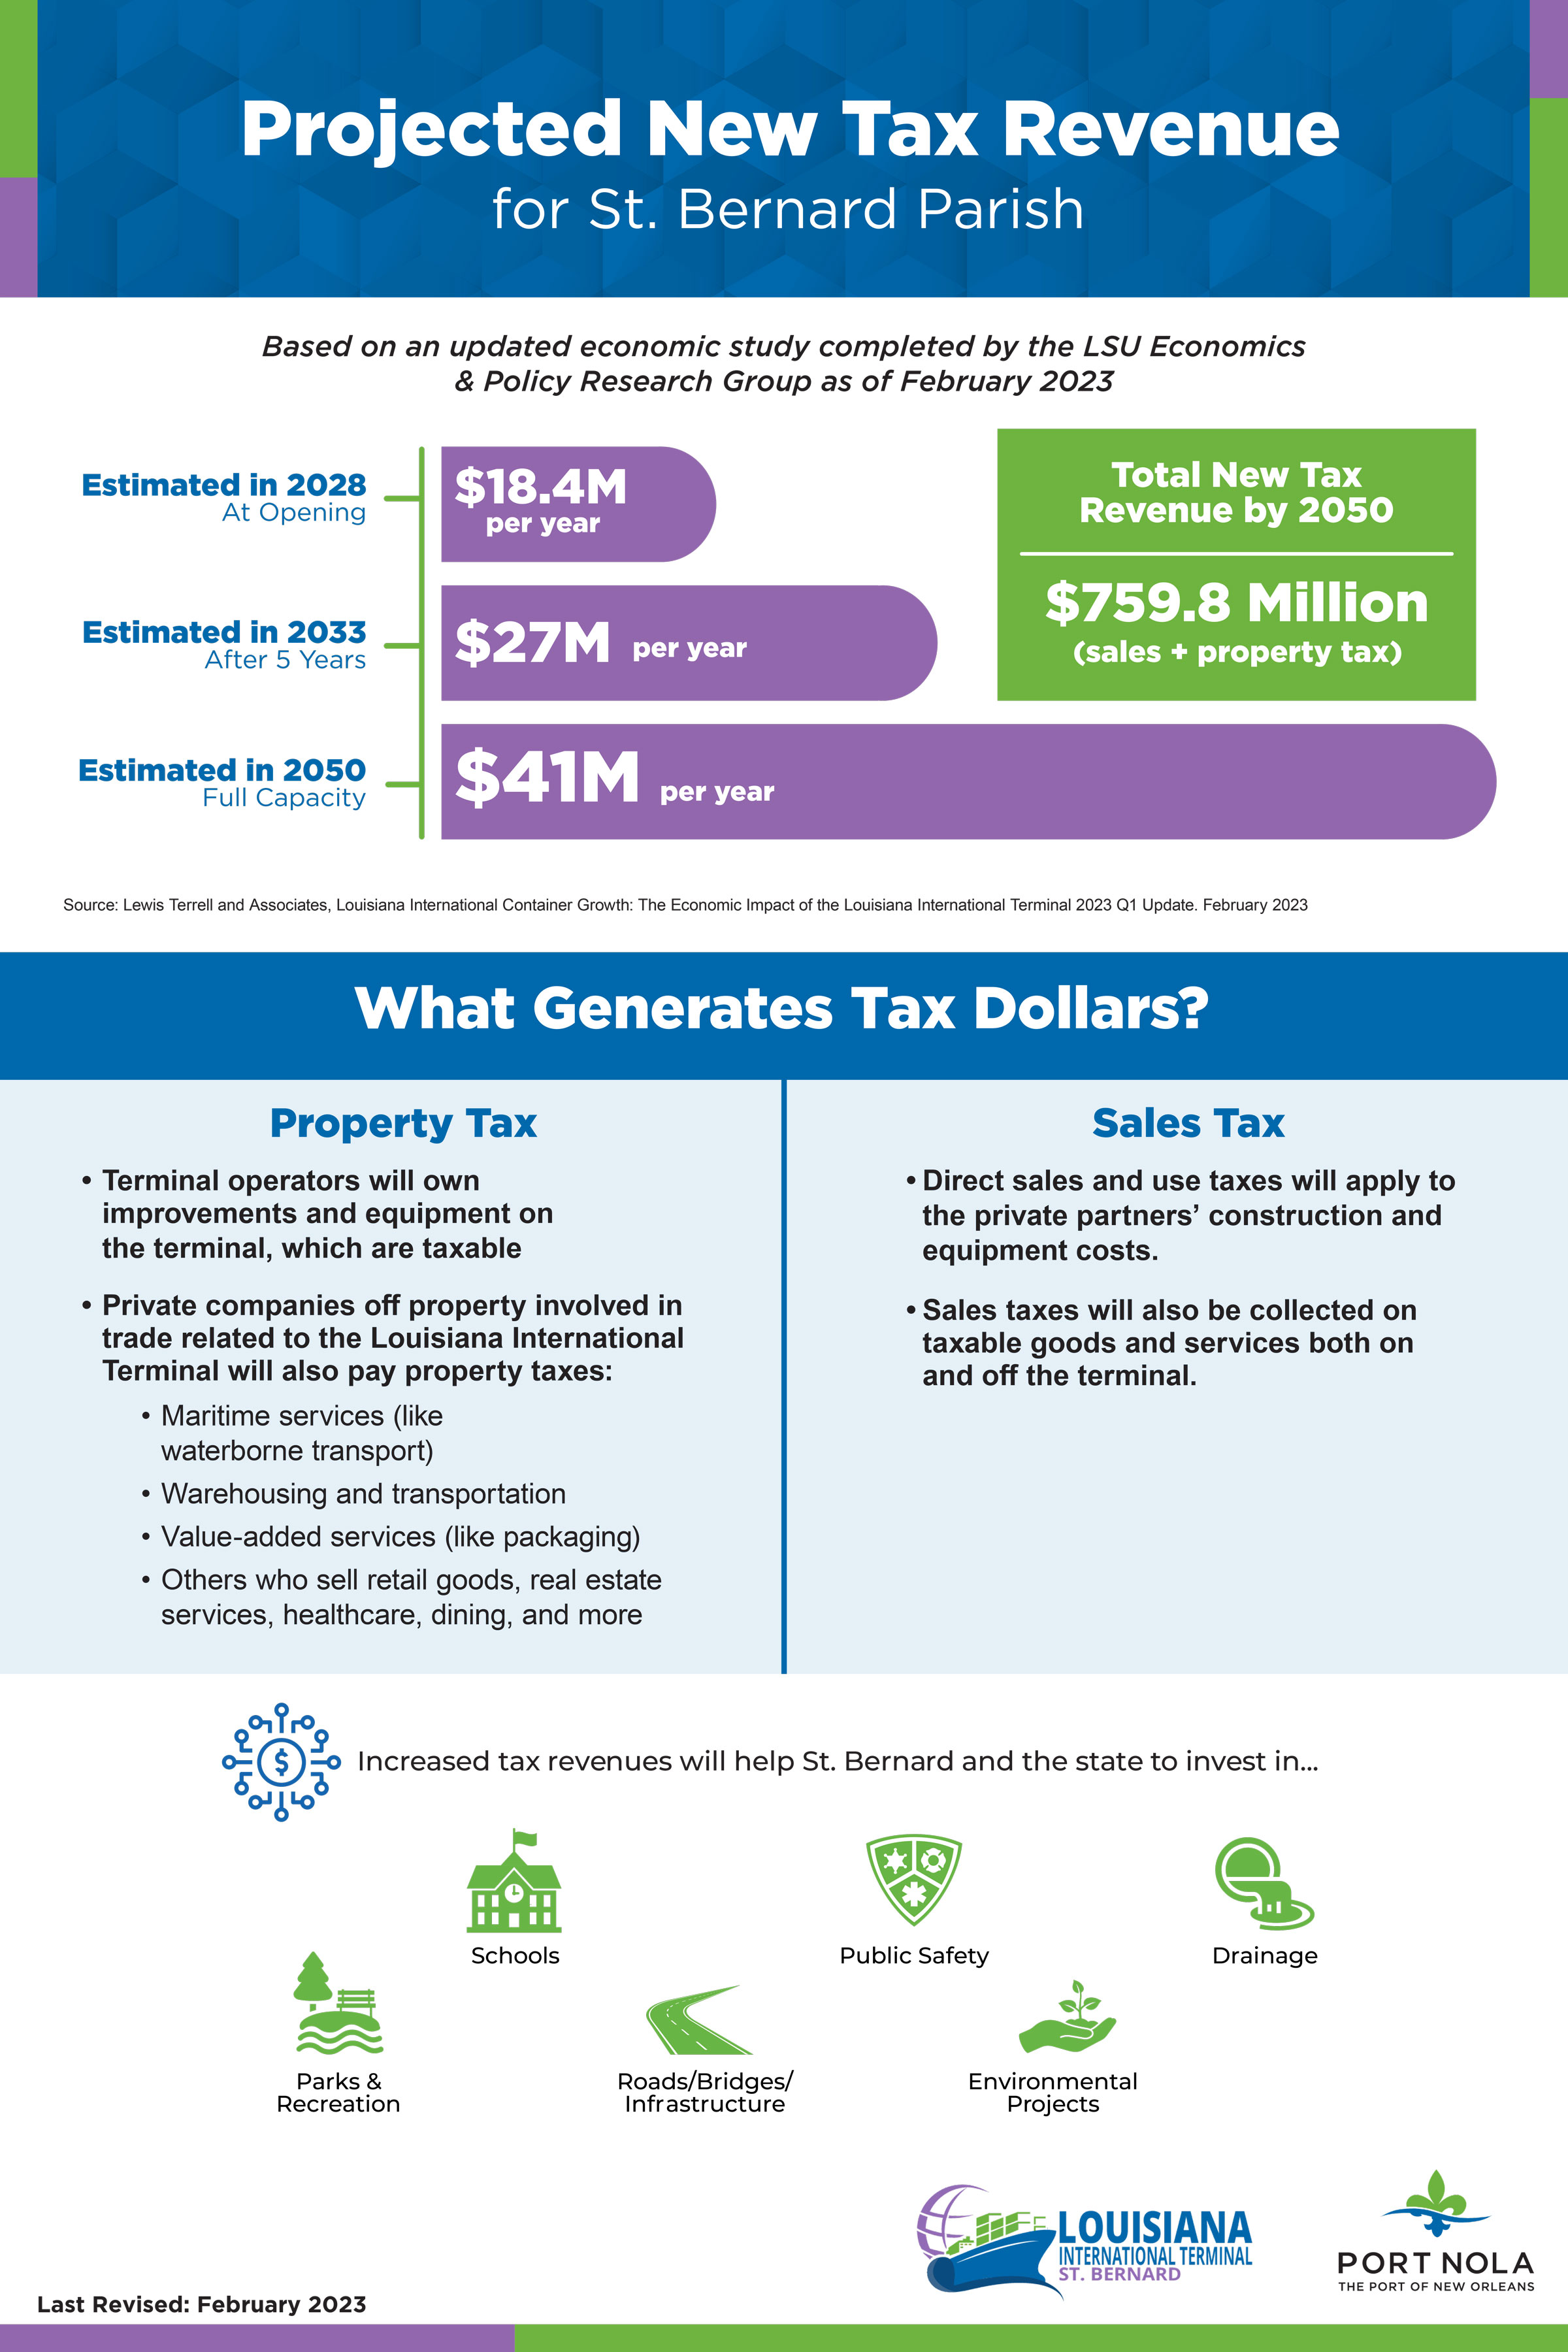 Graphic that depicts new tax revenue for St. Bernard Parish resulting from the terminal. The graphic shows an estimated $18.4 million per year in 2028 growing to $41 million per year in 2050. It also explains what generates taxes, such as property taxes from private companies near the terminal as well as improvements and equipment on the terminal owned by the terminal operators. The terminal will also generate sales tax on taxable goods and services on and off the terminal. Lastly, the graphic shows how those tax dollars can be used to improve and expand community assets and services through investment in schools, public safety, drainage, infrastructure, recreation and environmental projects.